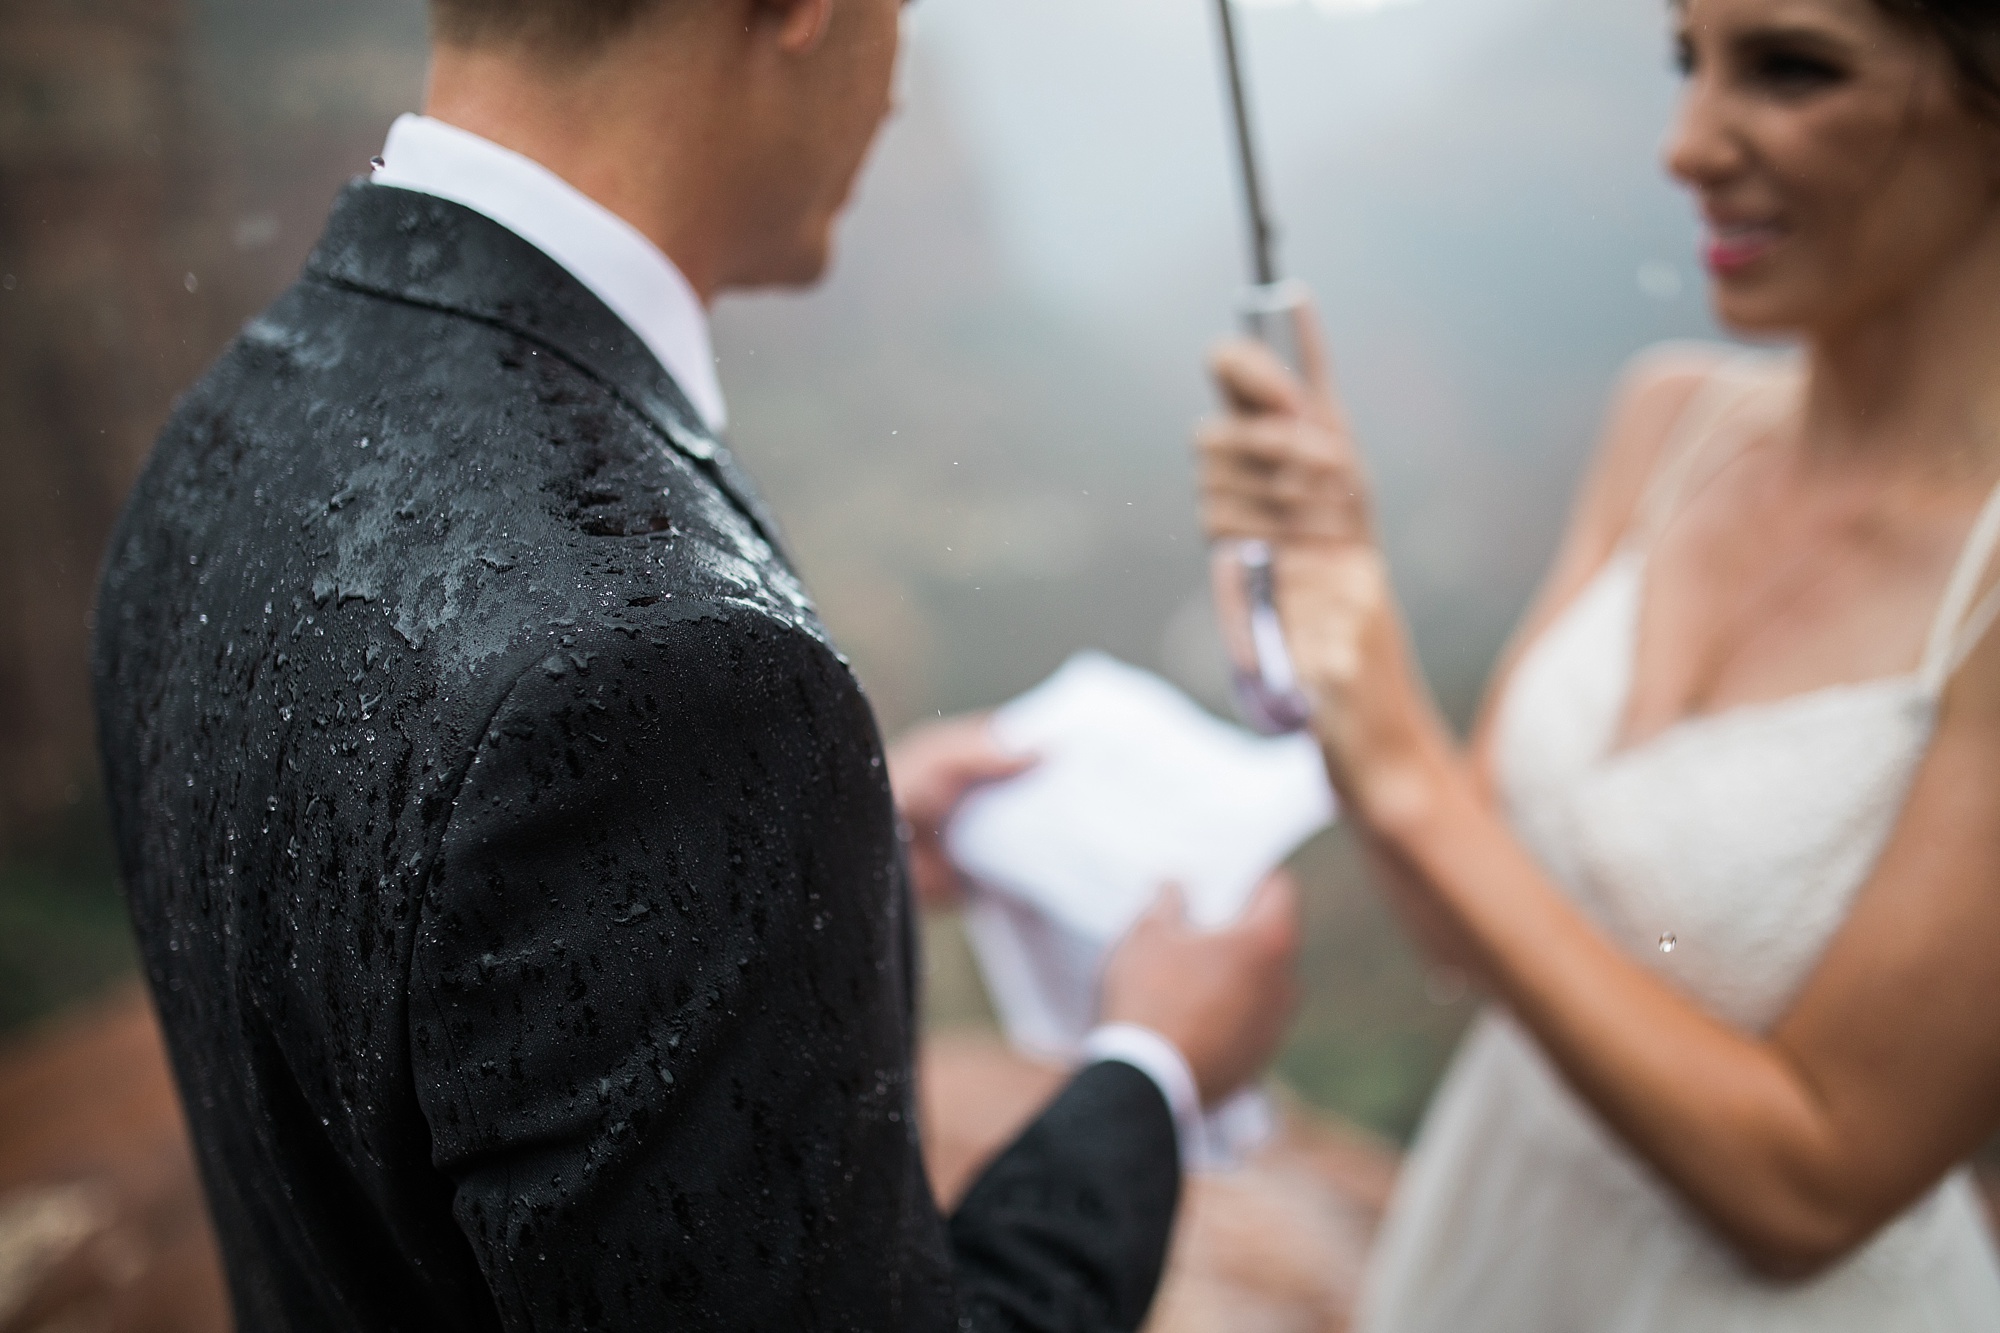 jessica micheal zion elopement utah wedding canyon overlook hazel and lace photography